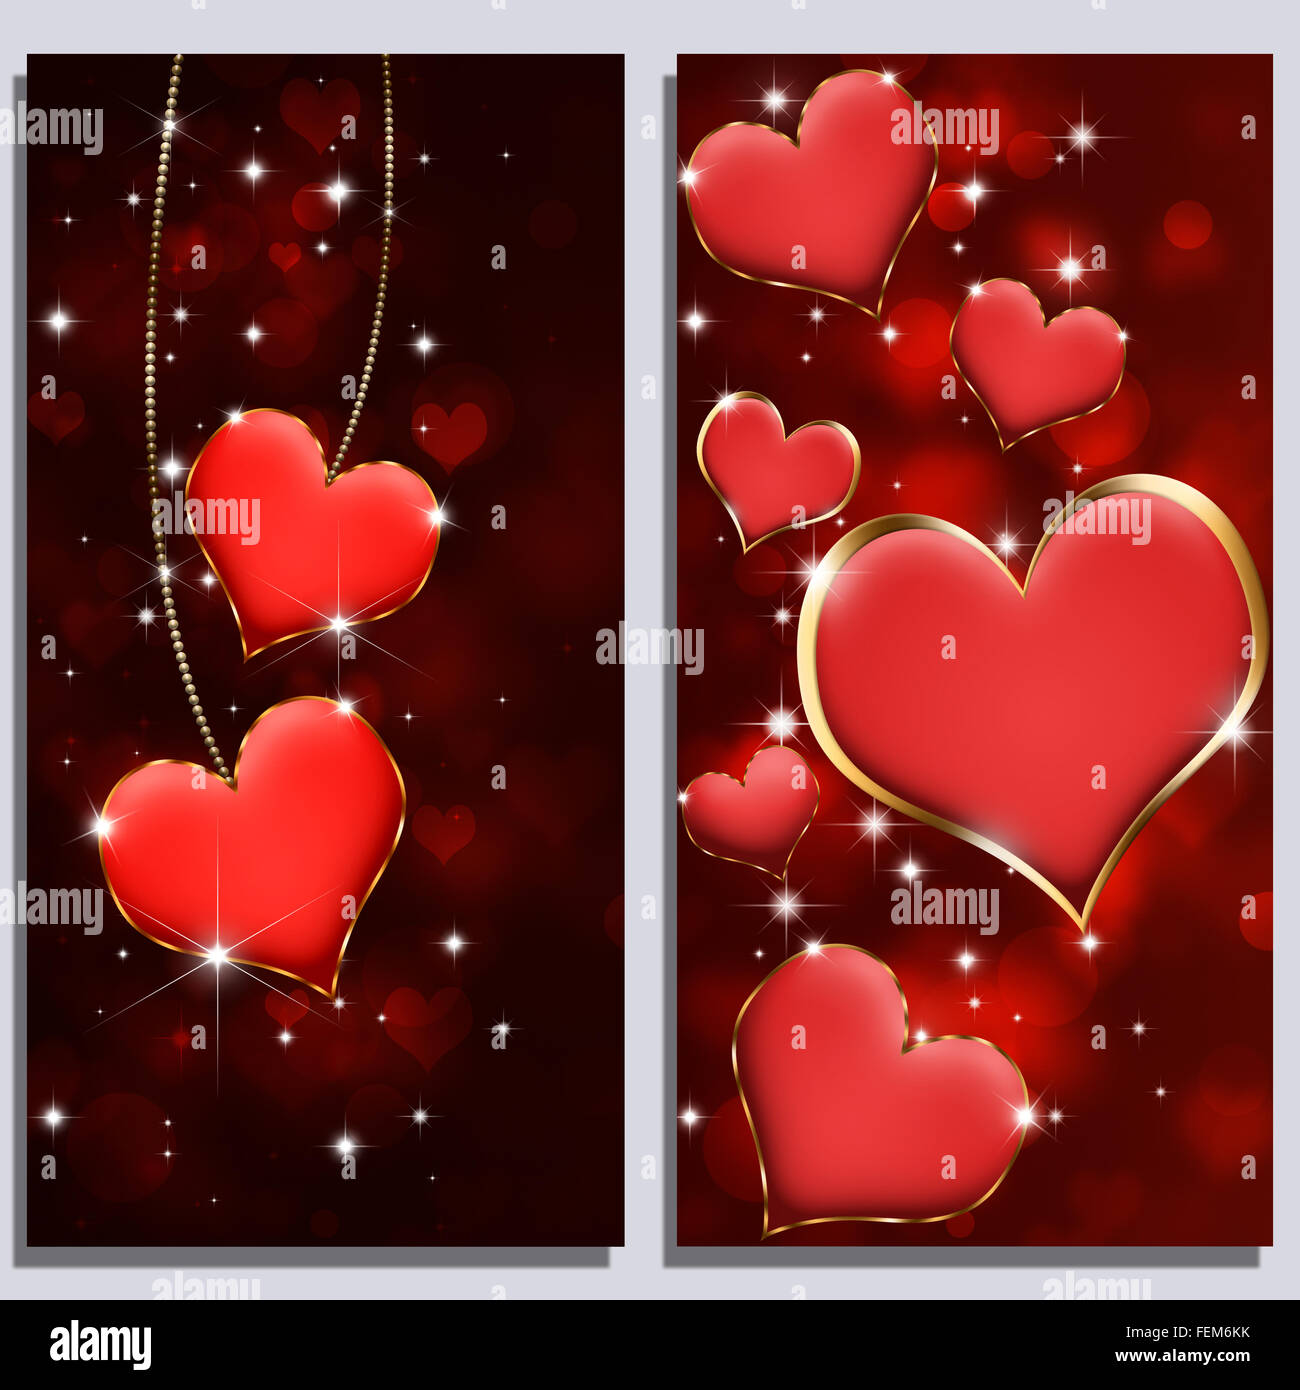 valentine holiday celebration banners with hearts and blurry lights Stock Photo